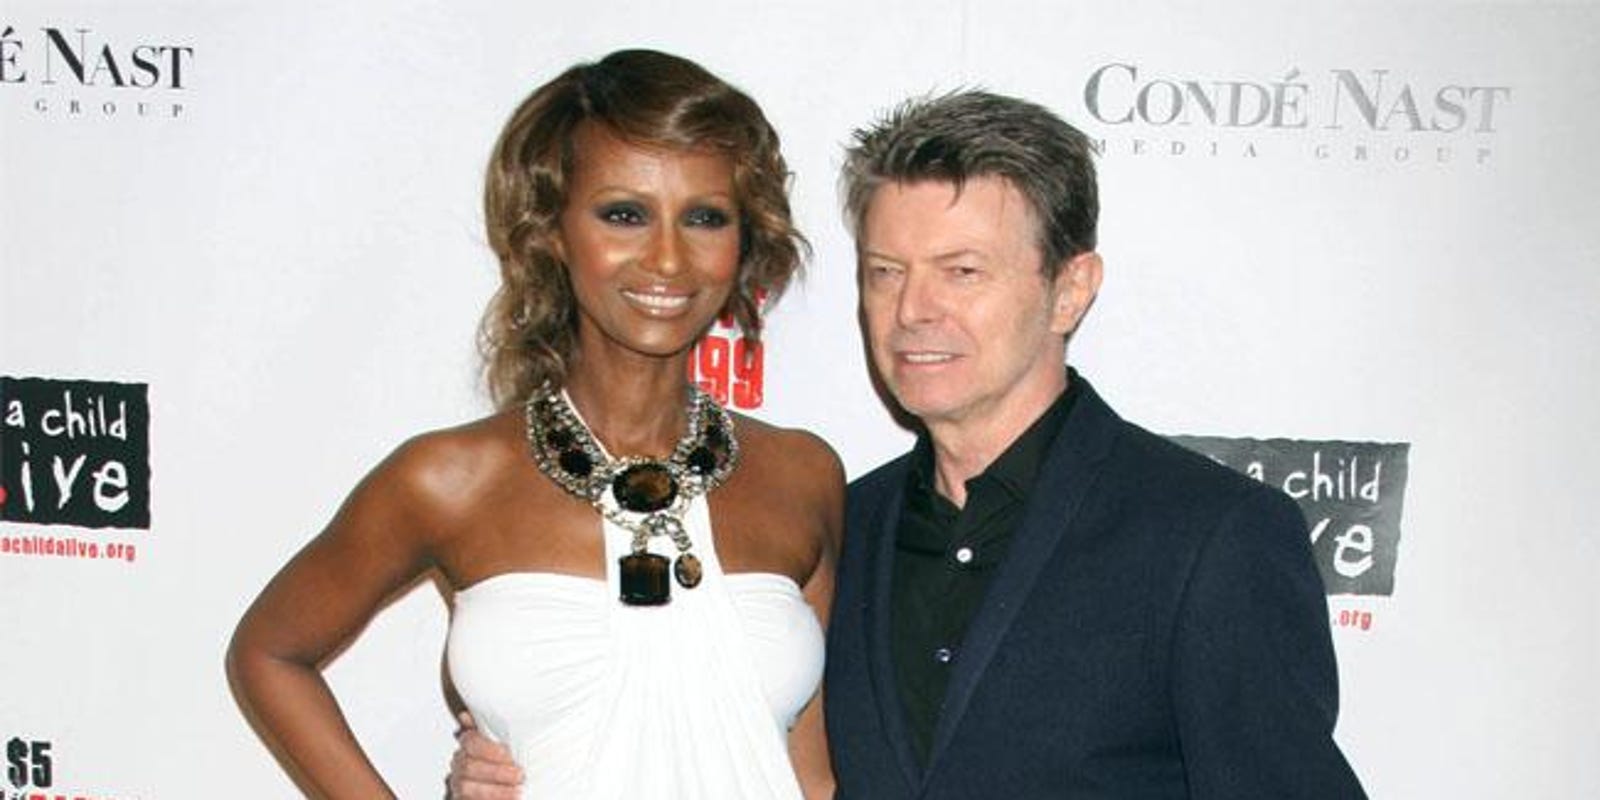 Tiny Model Candy Porn - David Bowie was lonely before meeting Iman